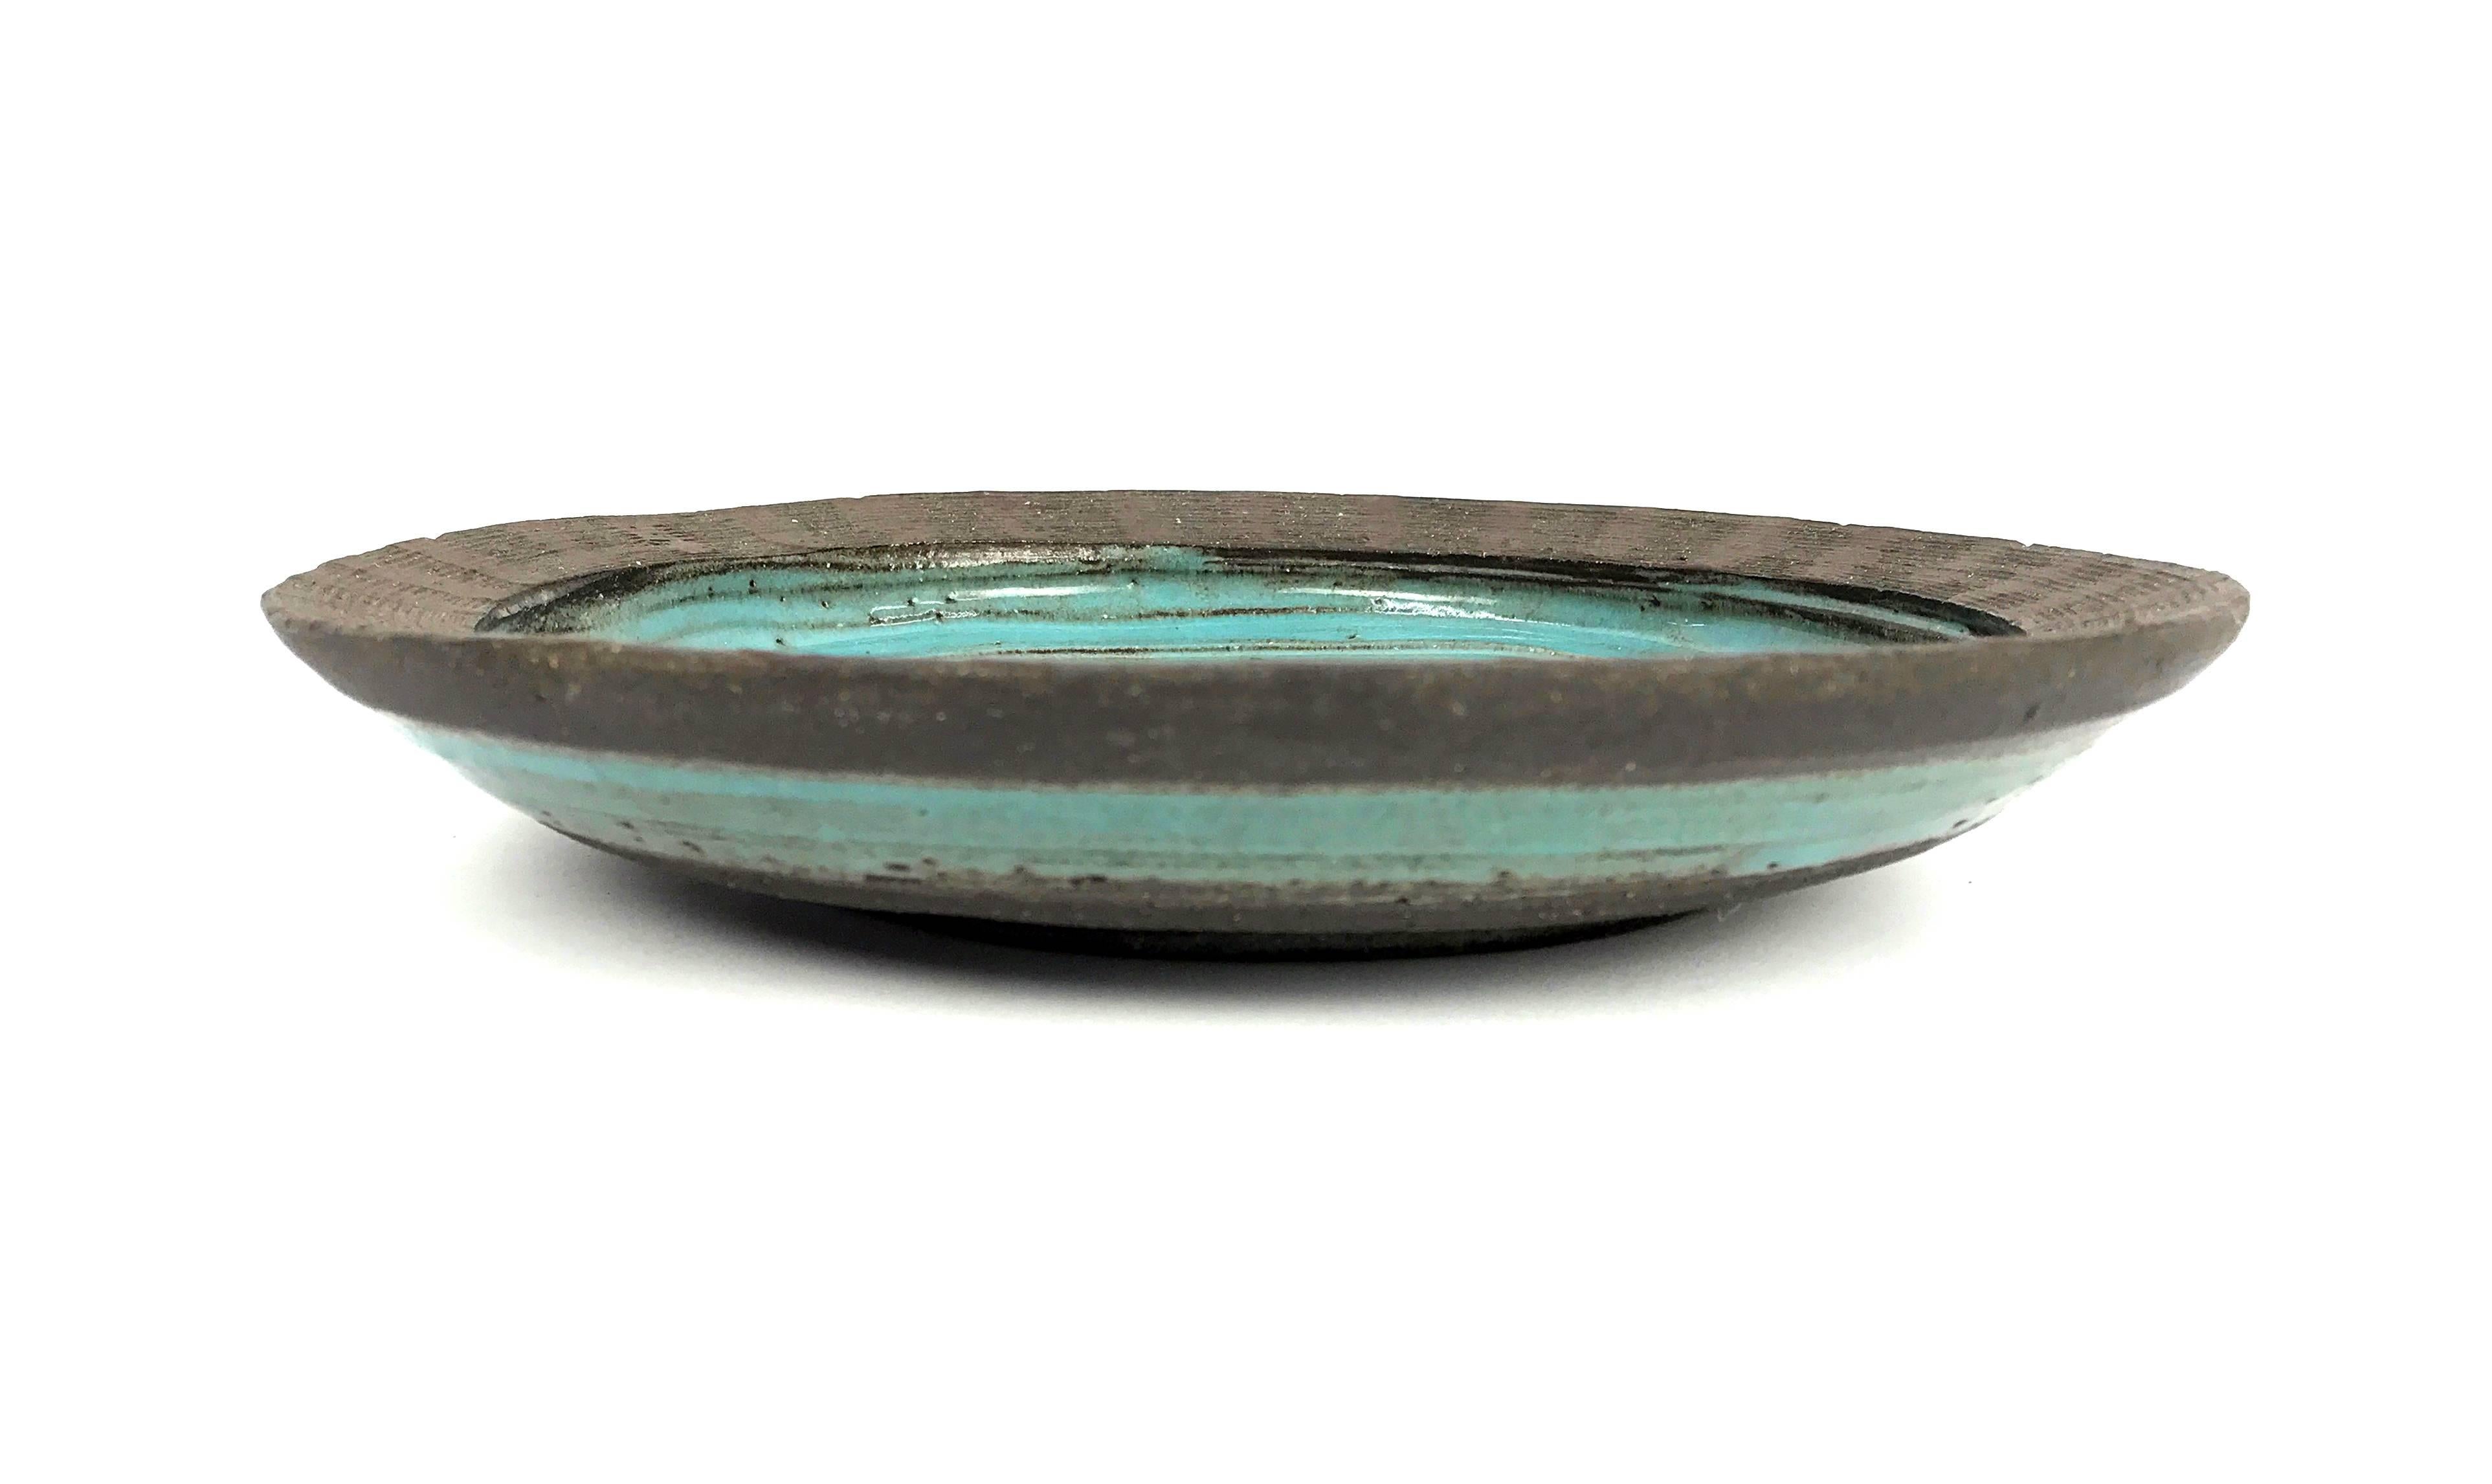 This beautiful ceramic bowl in classic 1960s aqua and earth tones was created by Mary Grote.

We know little about Mary Grote as an artist, but - interesting especially because of their name similarities - this piece seems to have been created in